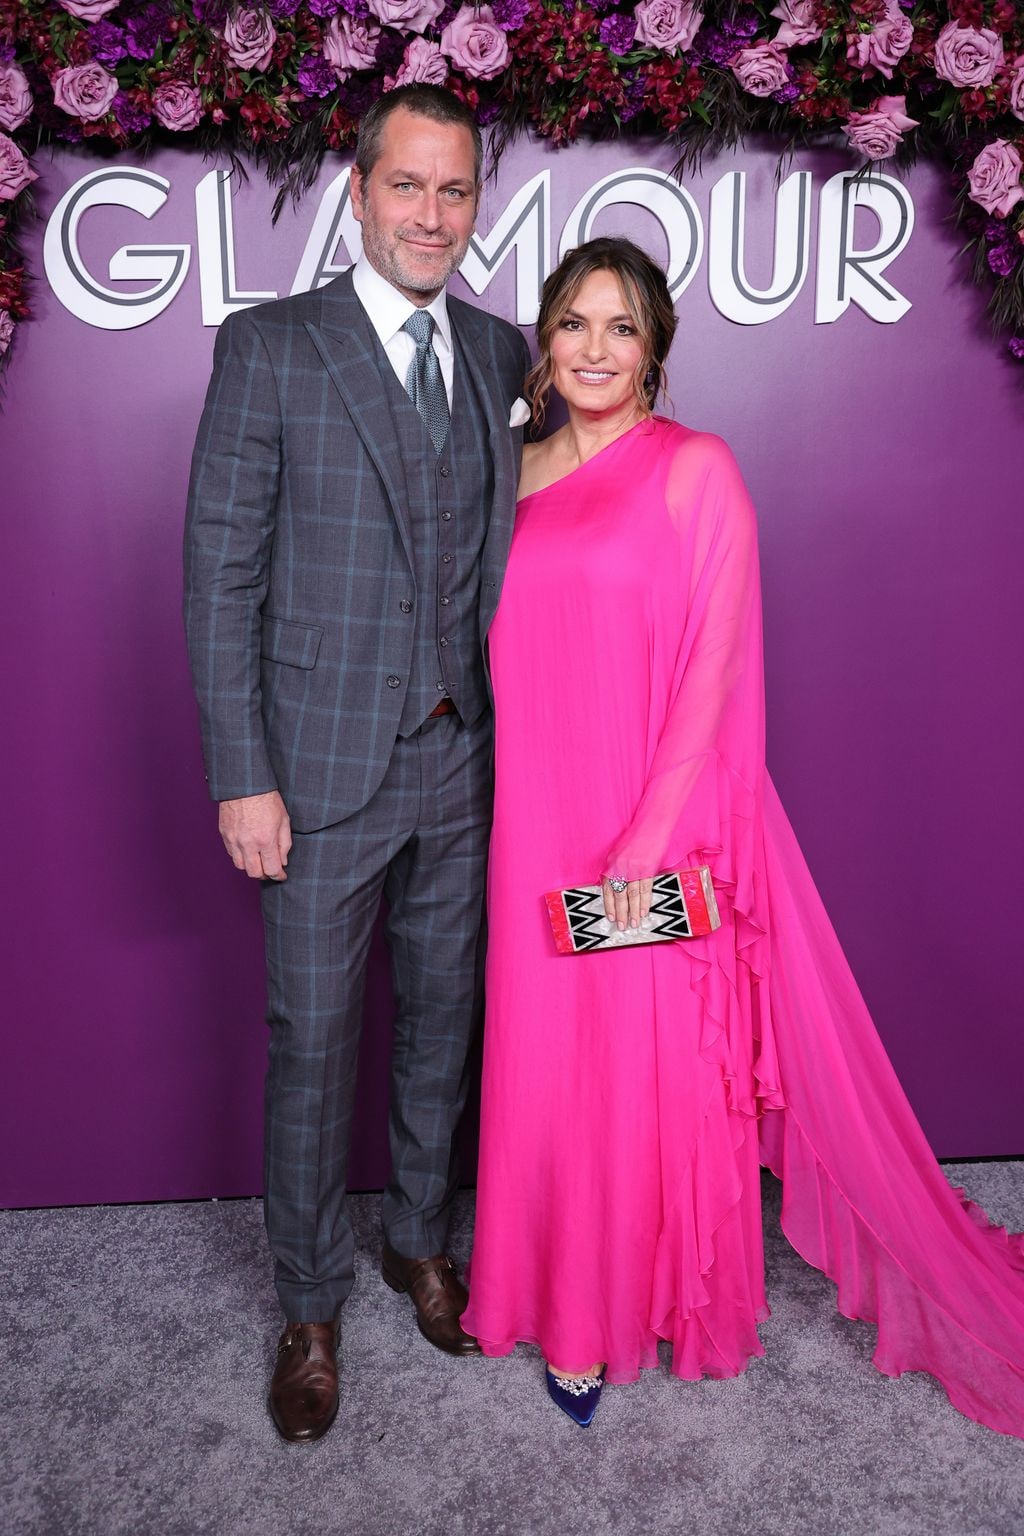 Peter Hermann and Mariska Hargitay attend the 2021 Glamour Women of the Year Awards at the Rainbow Room at Rockefeller Center on November 08, 2021 in New York City